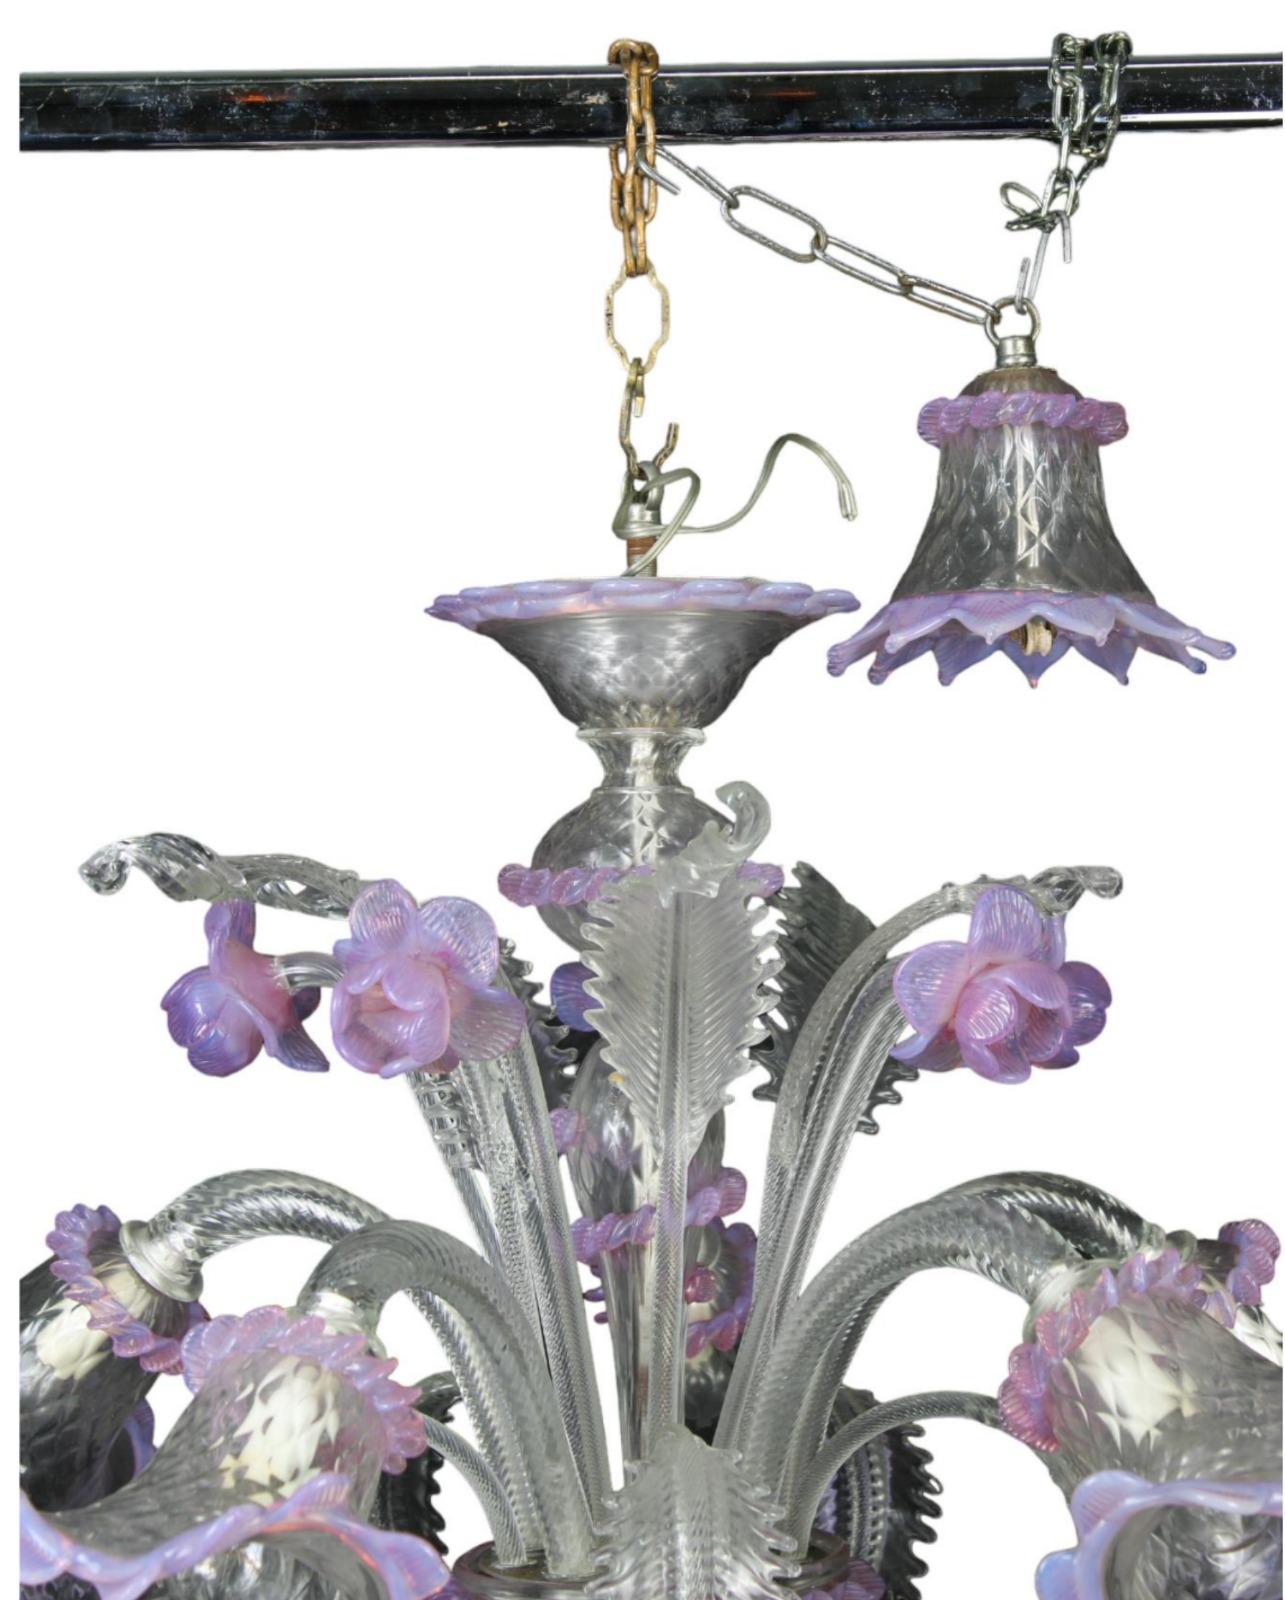 5 ARMS CHANDELIER
in Murano glass Venice Early 20th Century

h: 67 x 75 cm
good condition